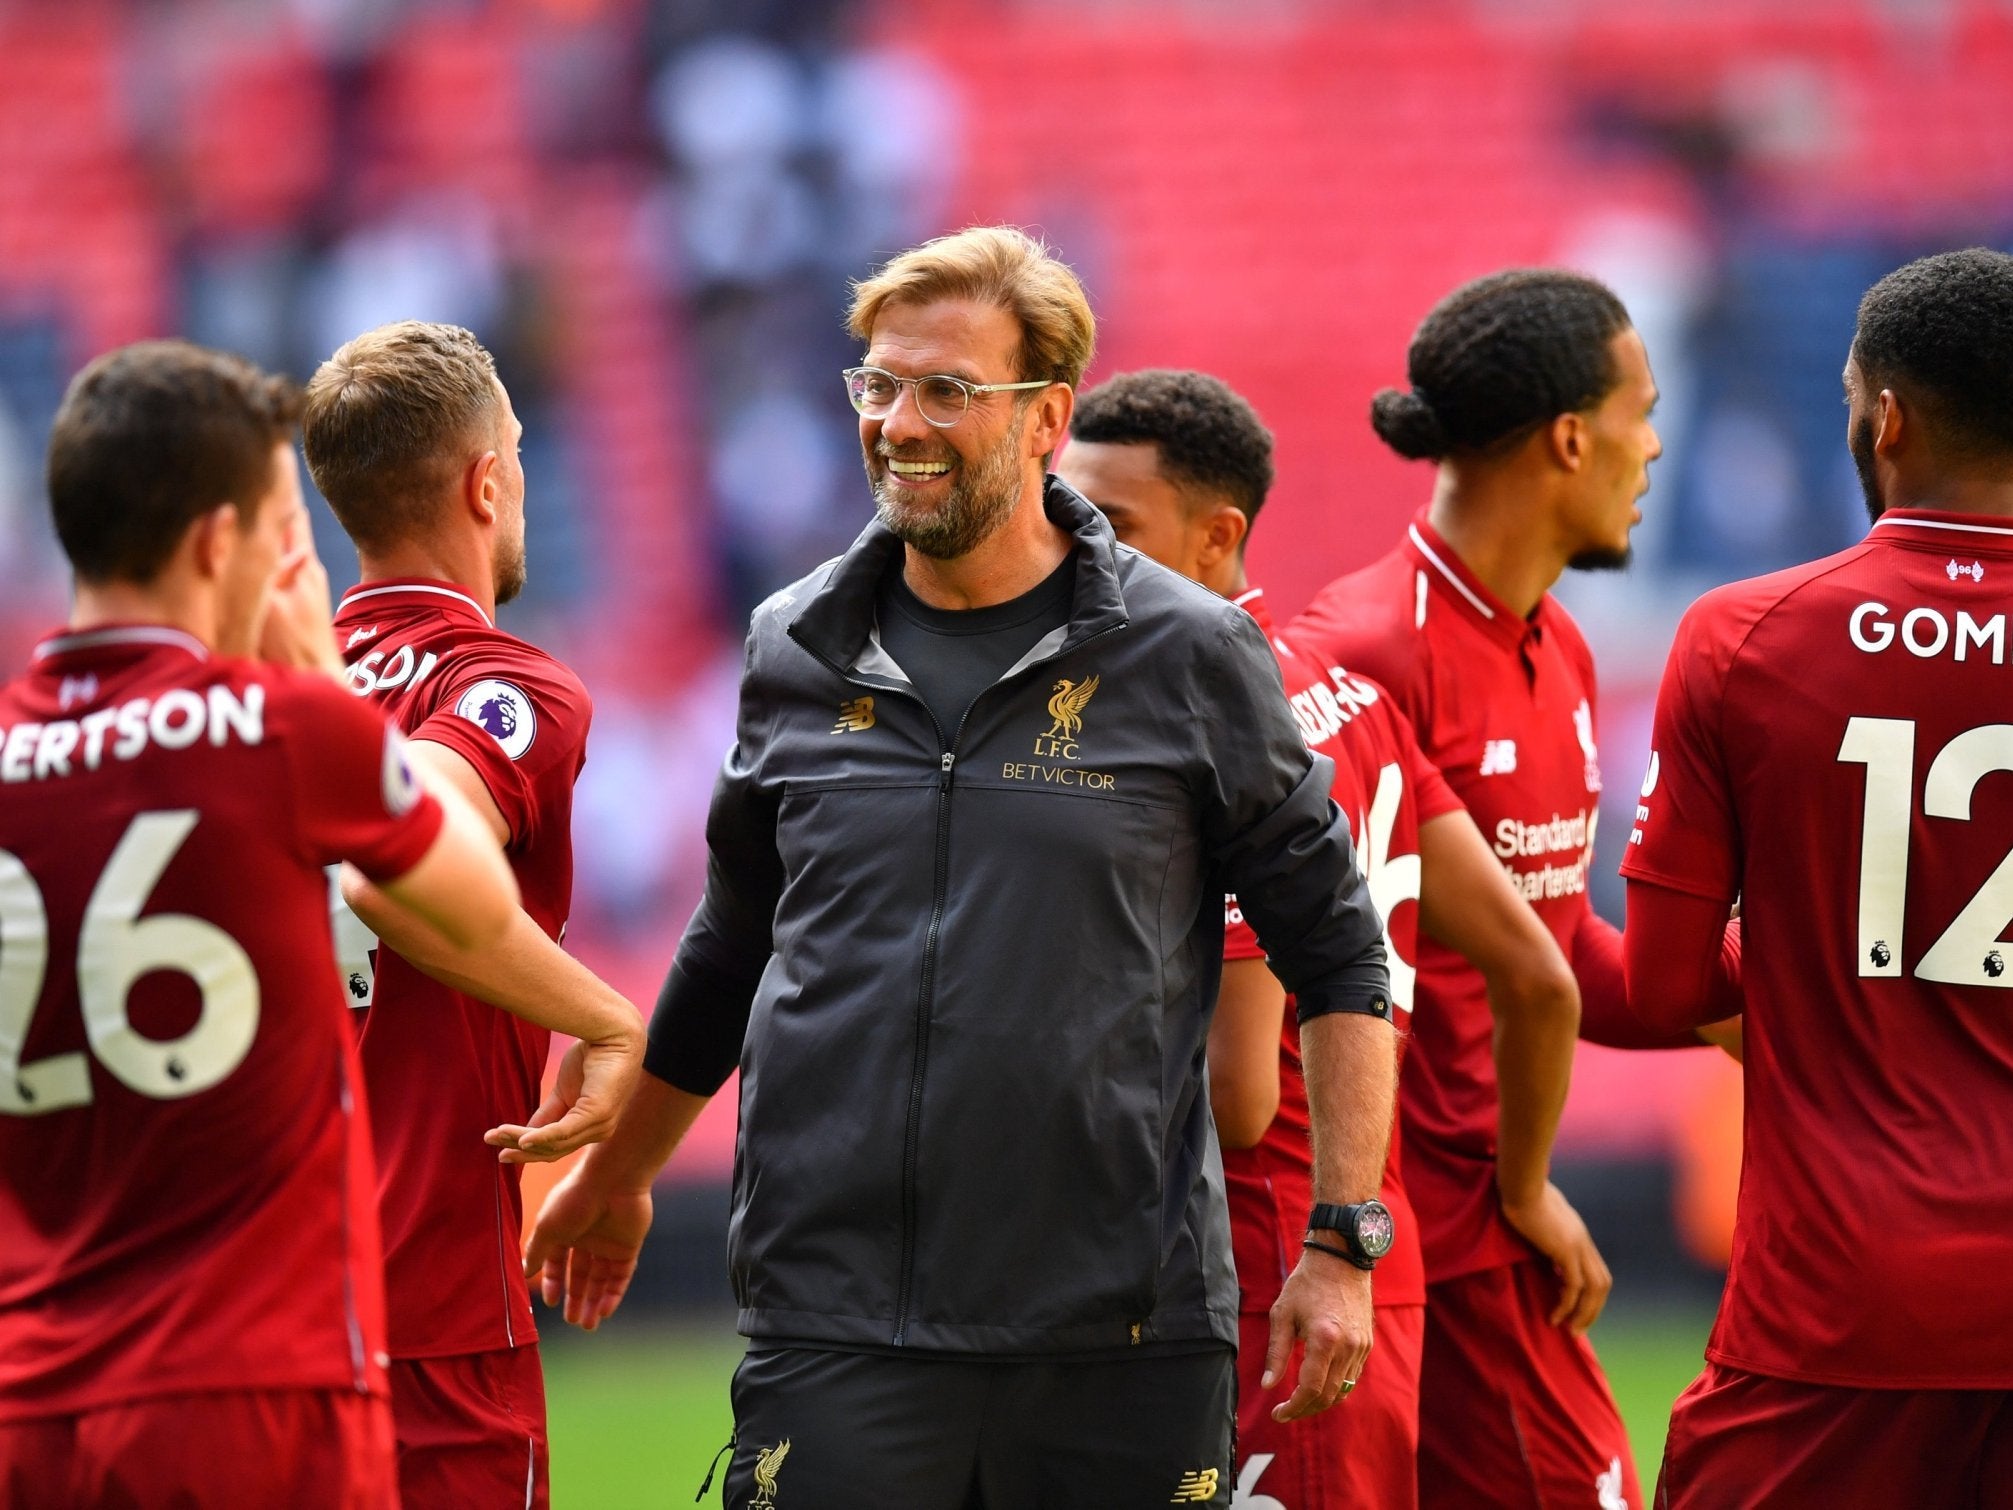 Jurgen Klopp celebrates with his players after Liverpool's win